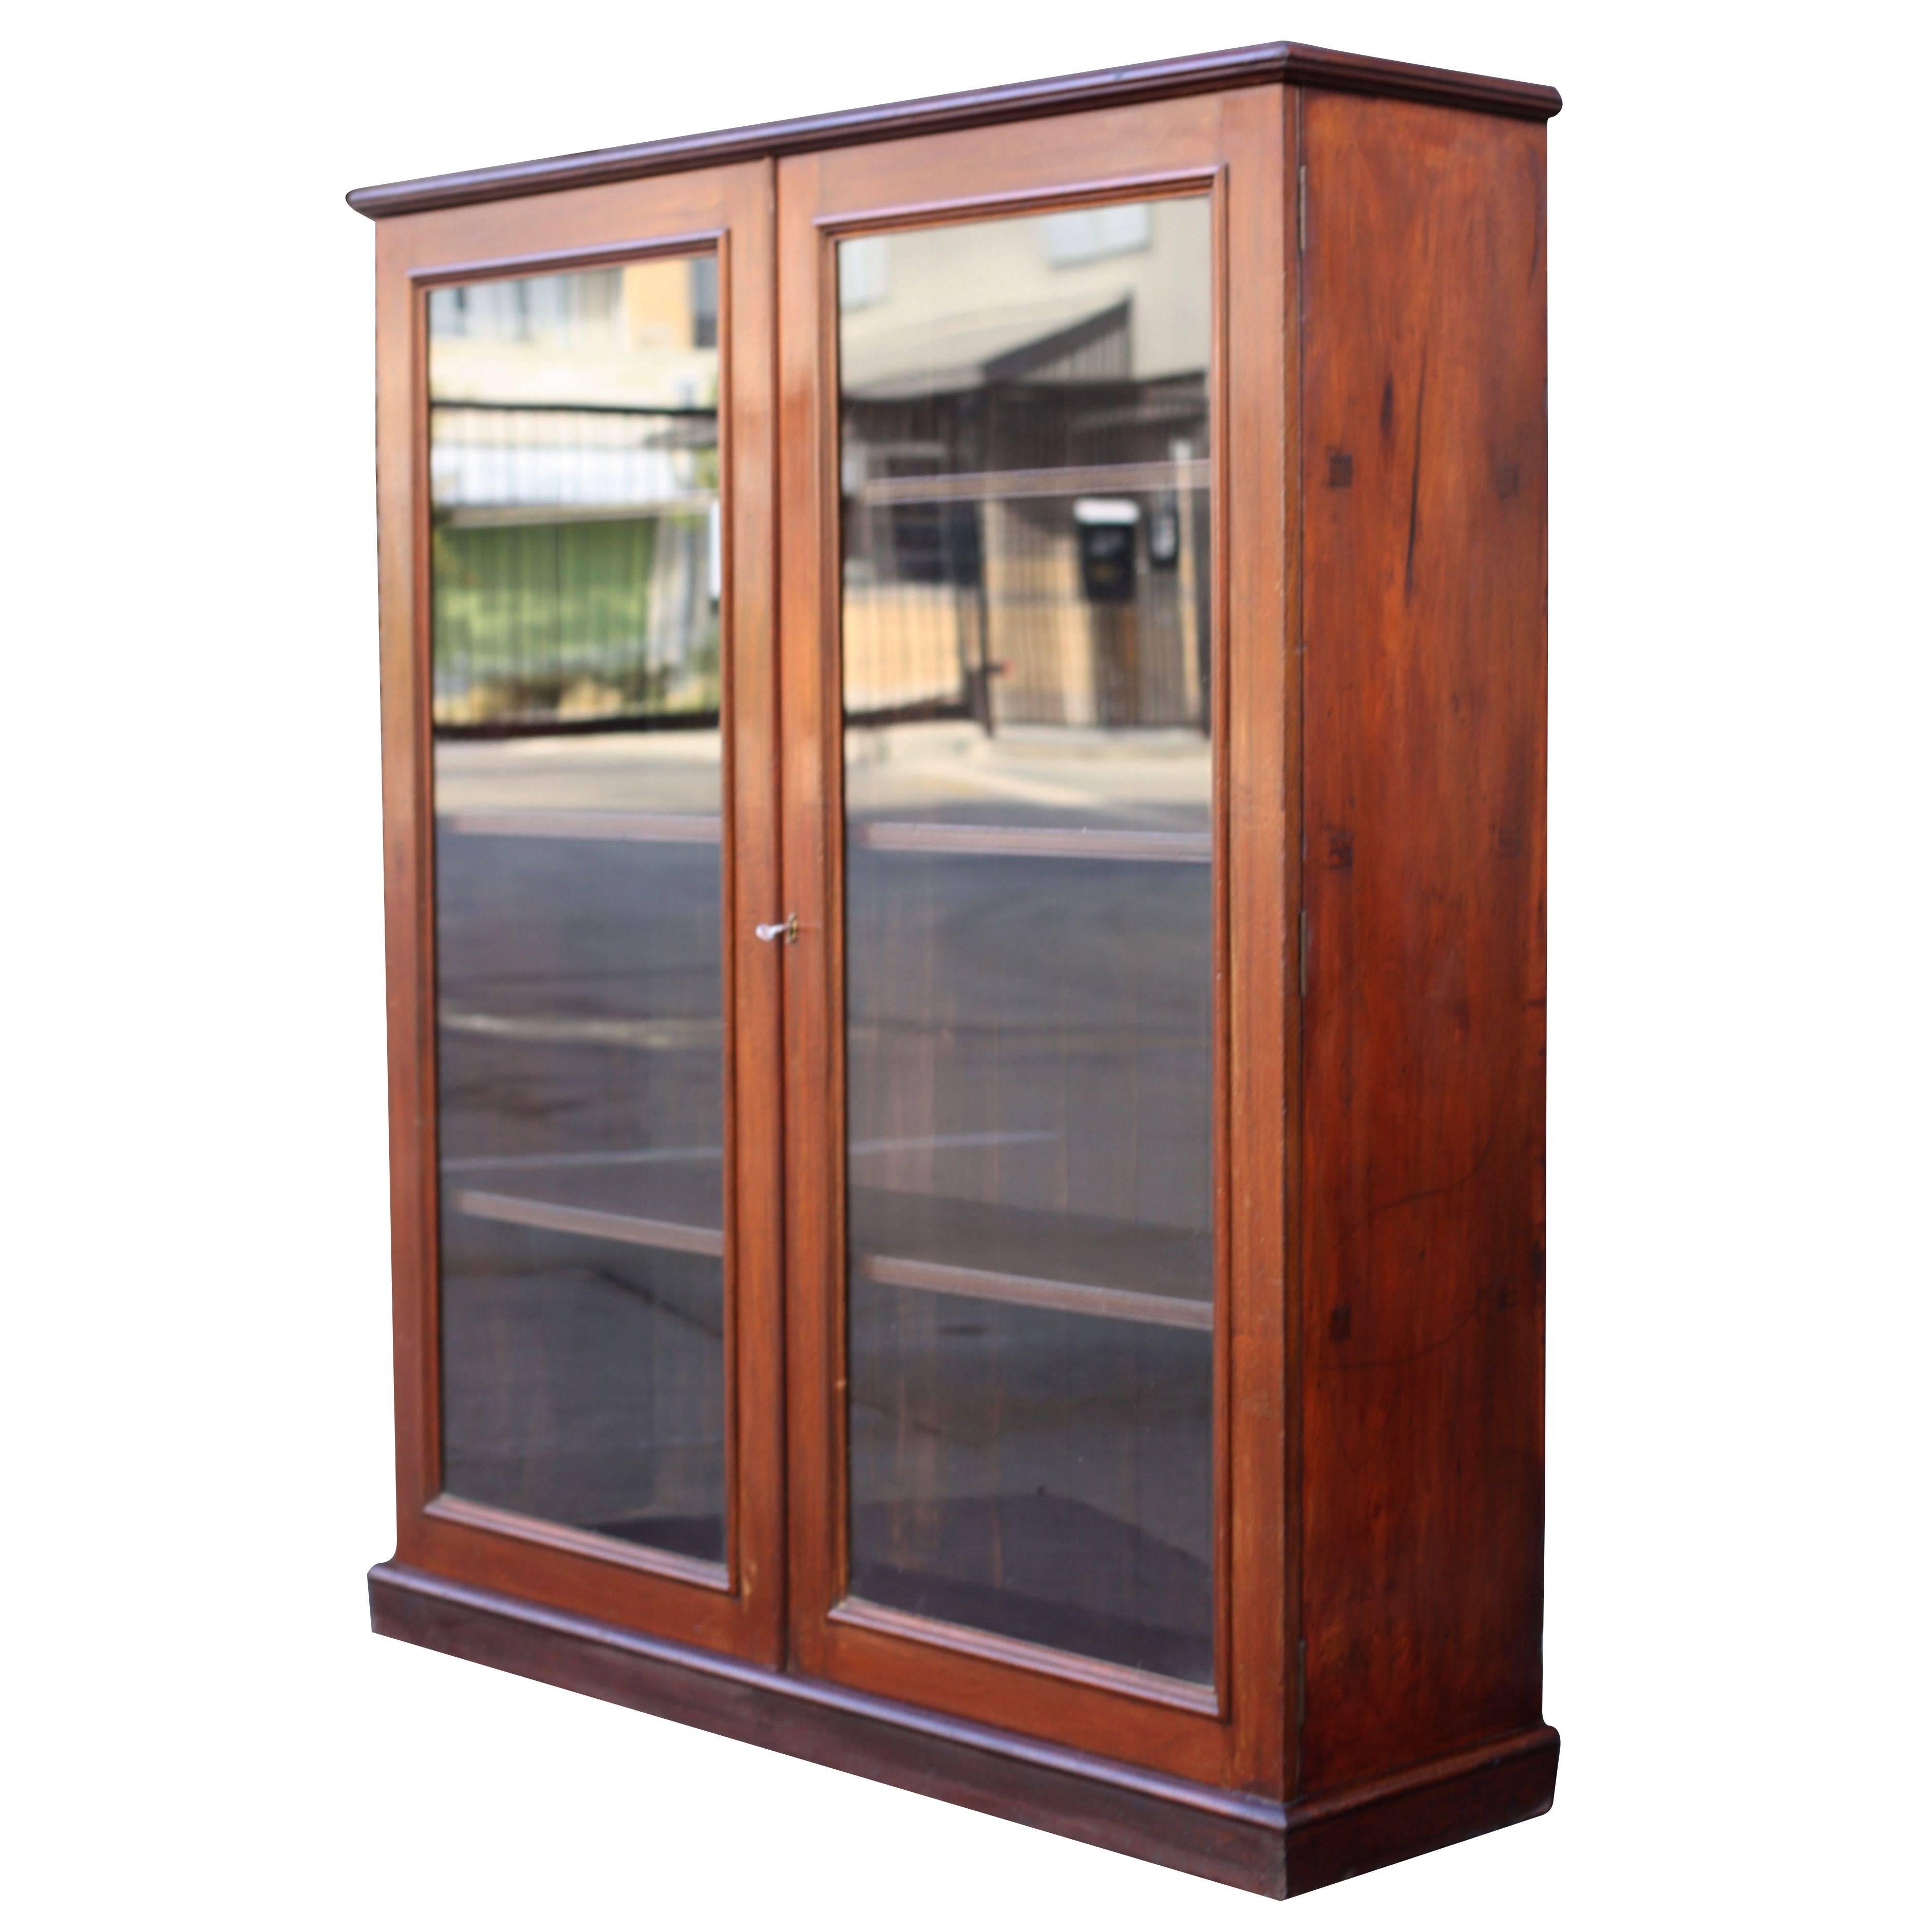 English Standing Bookcase of Mahogany with Glazed Doors